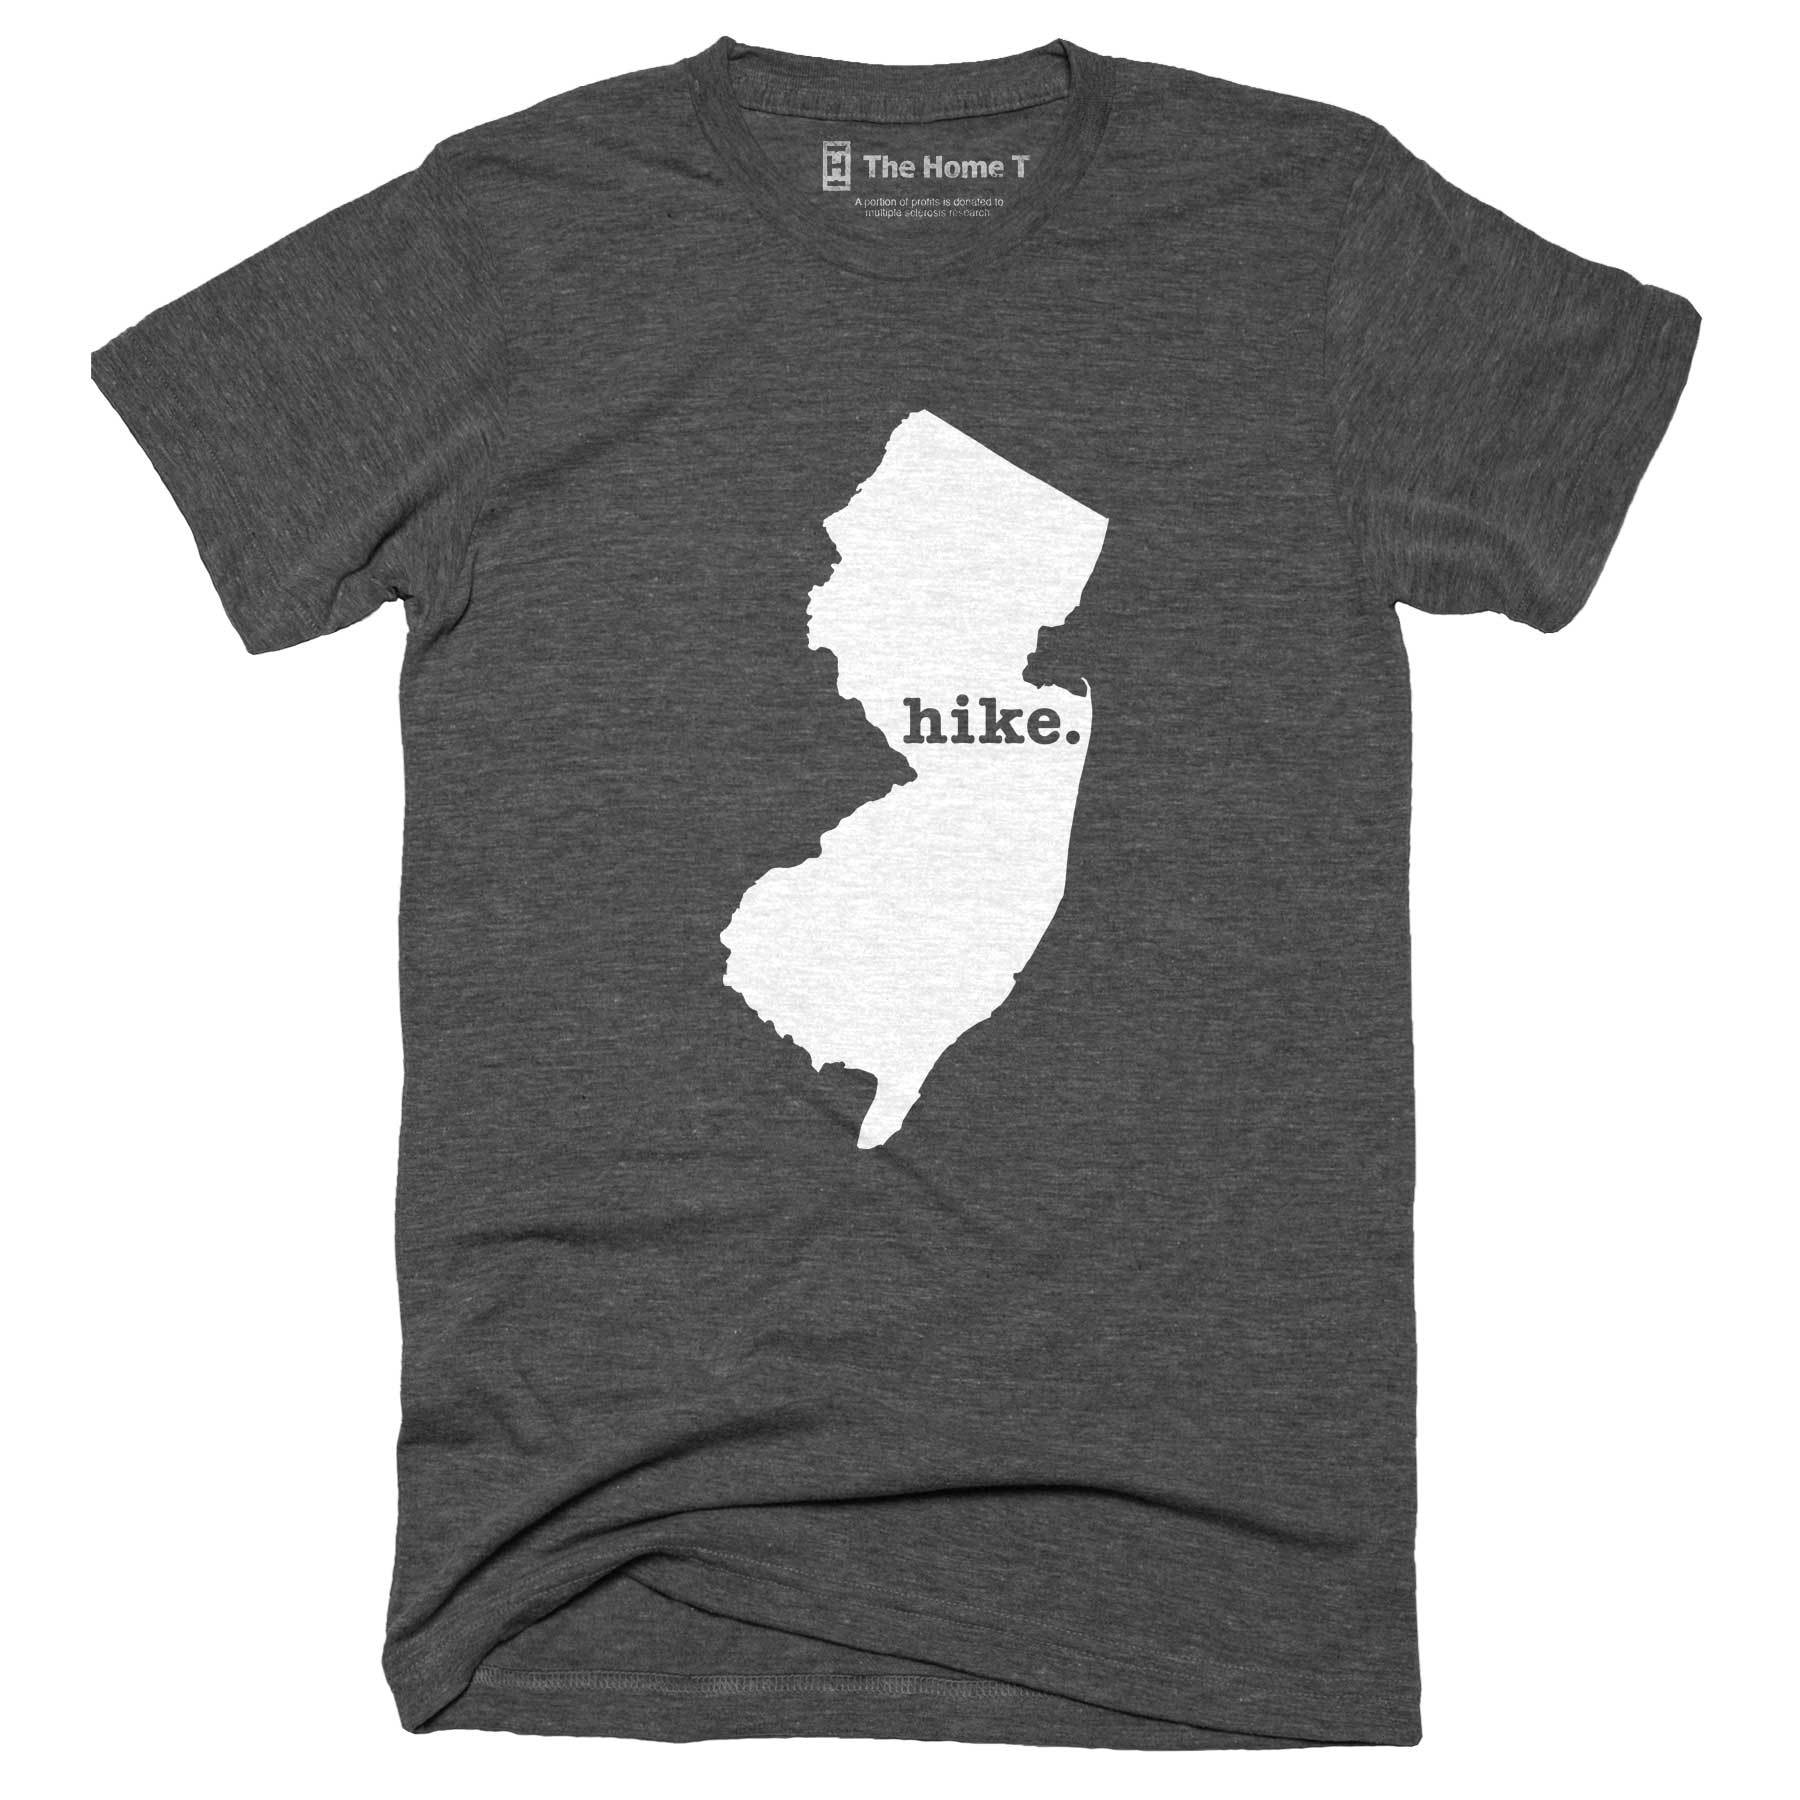 New Jersey Hike Home T-Shirt Outdoor Collection The Home T XXL Grey